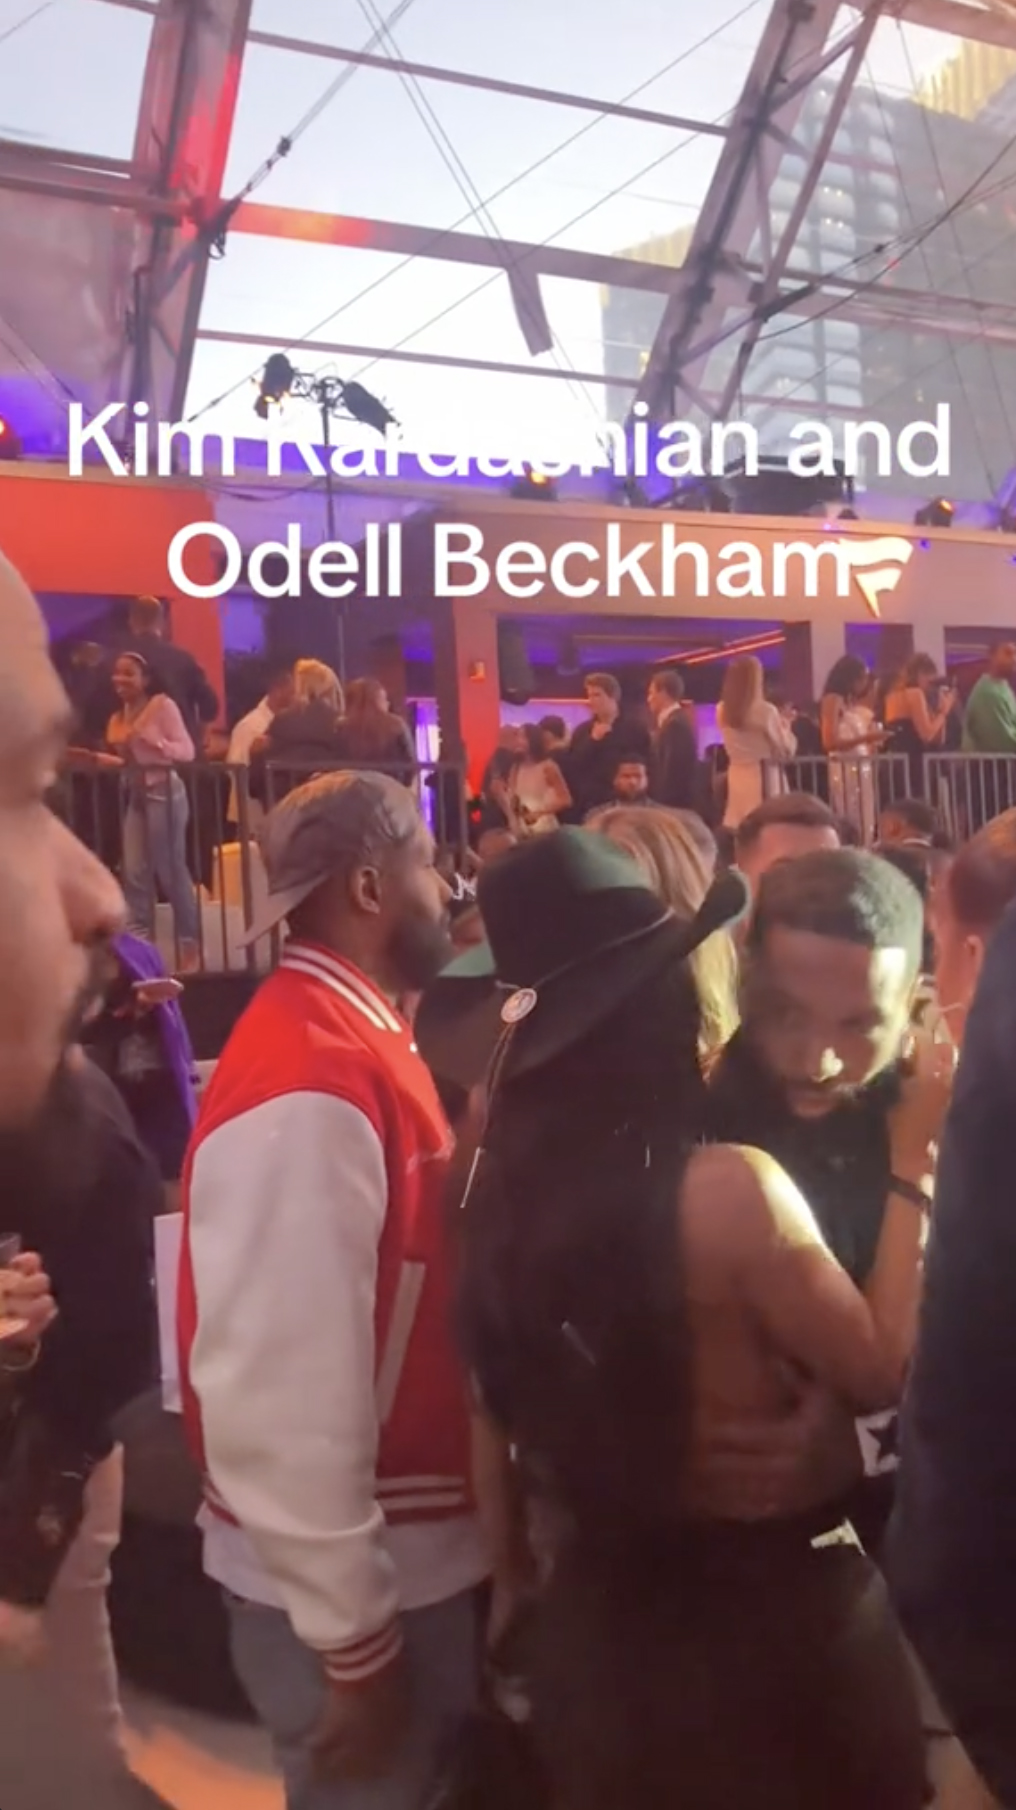 The speculation began after Kim and Odell were spotted together at a party in Las Vegas, Nevada, last week